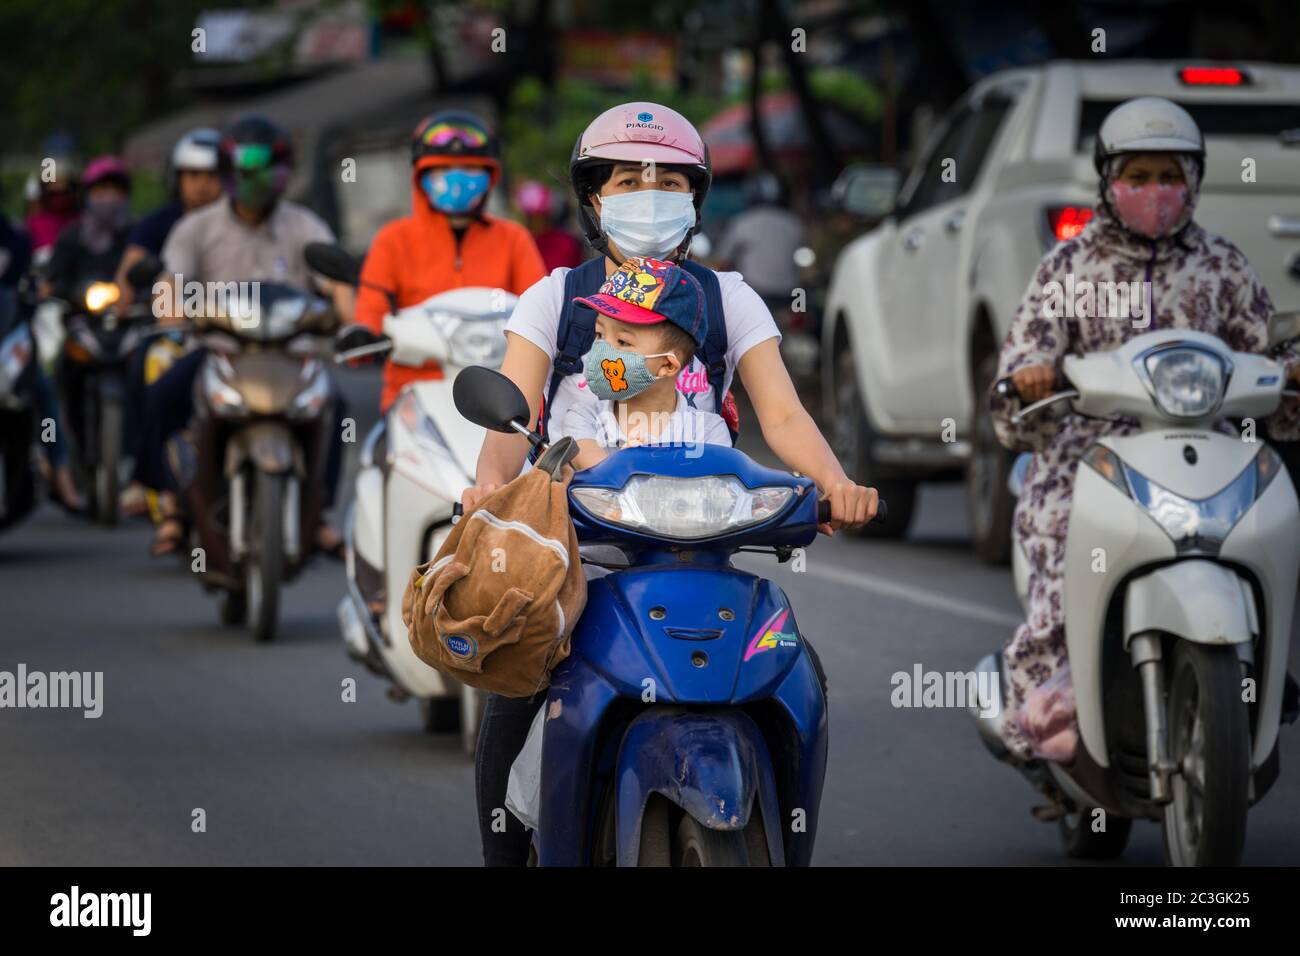 HUE, VIETNAM - Mar 07, 2018: HUE, VIETNAM - MARCH 07, 2018: Woman carrying a child while wearing face mask and riding motorbike on Pham Van Dong stree Stock Photo